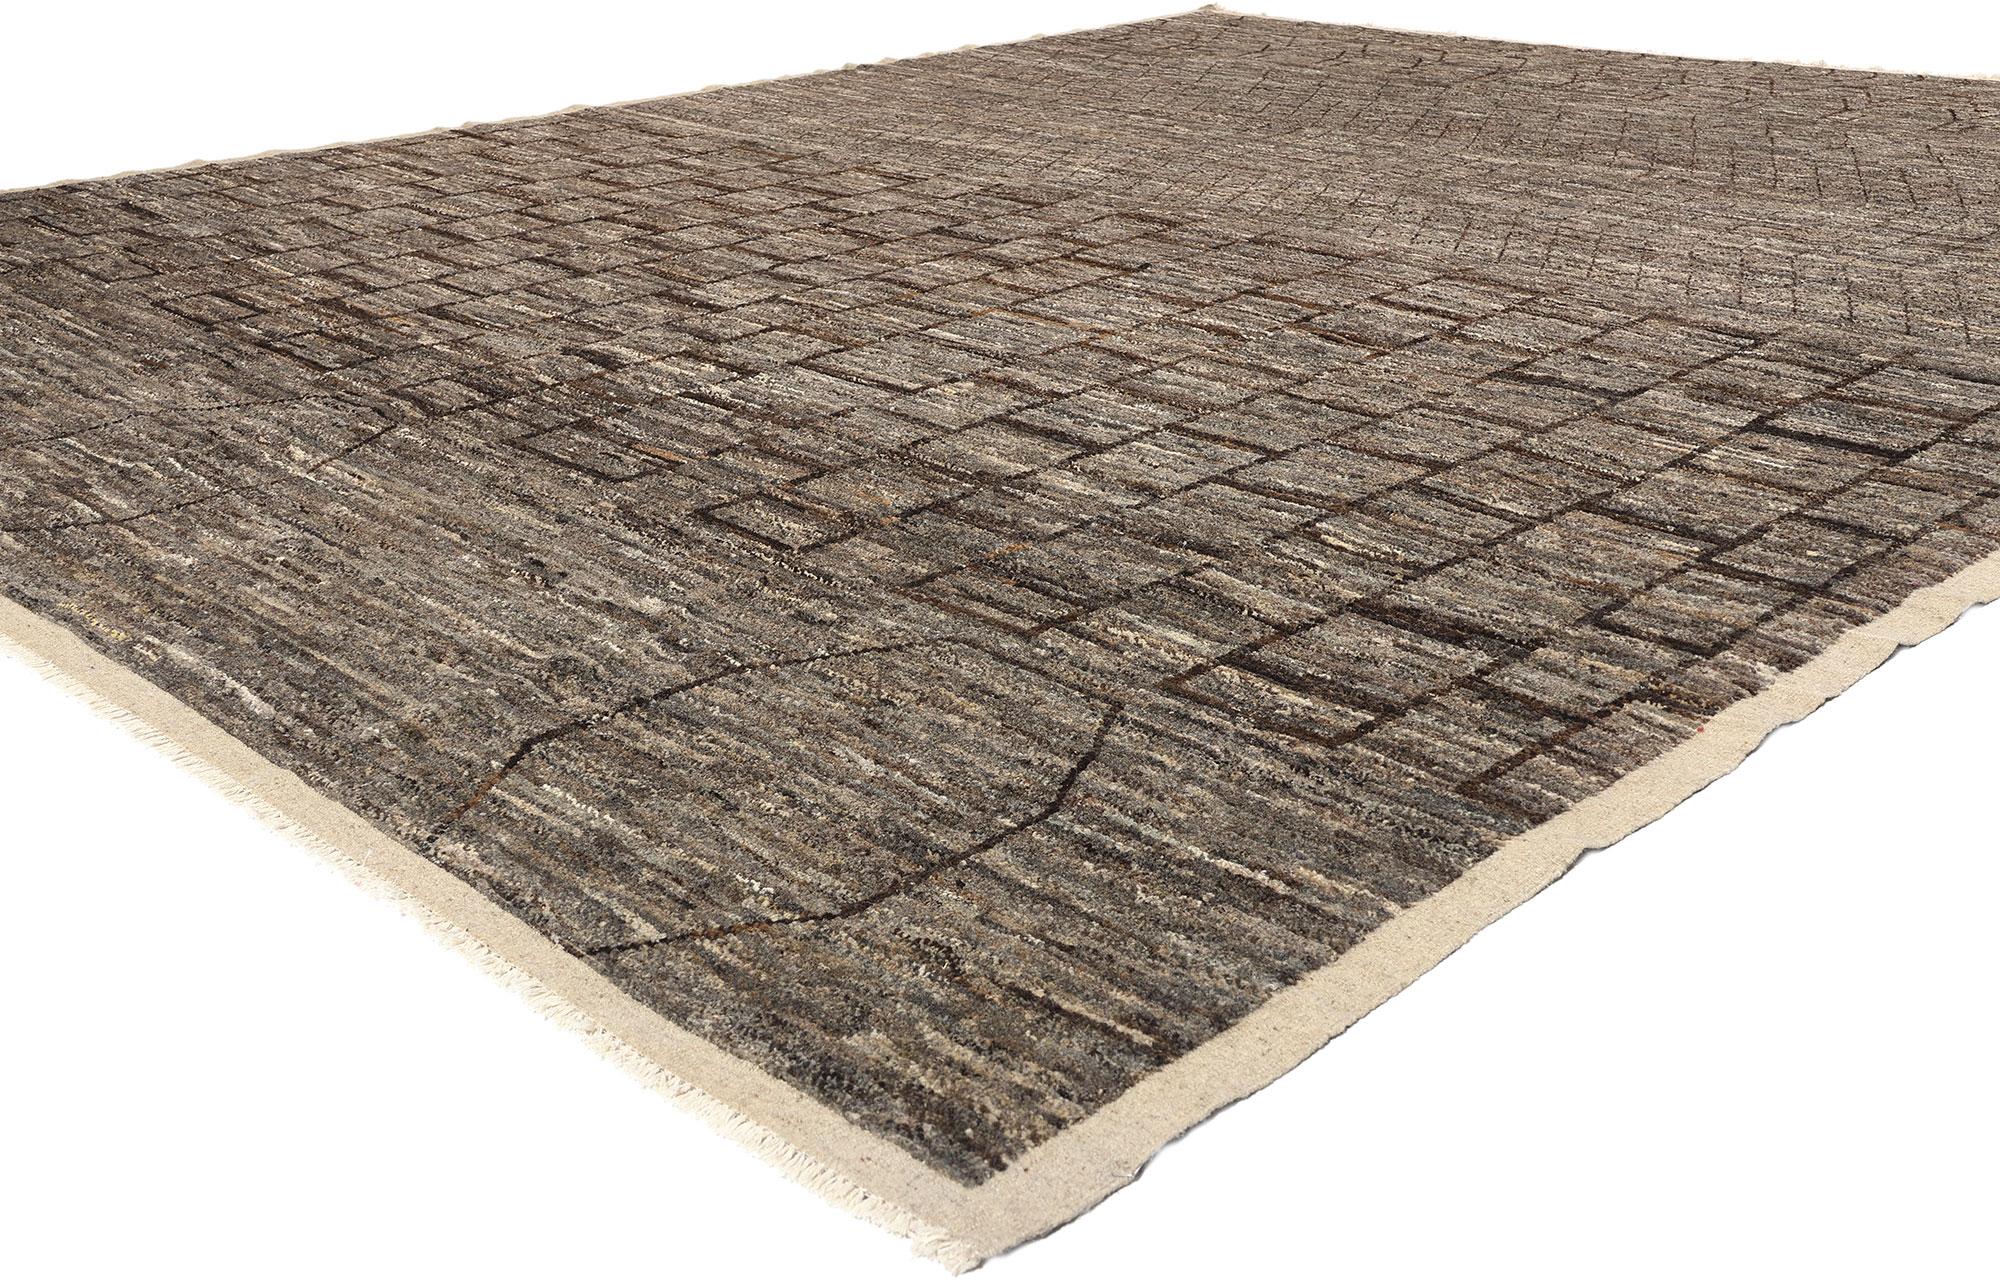 81116 Organic Modern Brutalist Moroccan Rug, 09'10 x 14'10. This hand-knotted wool Organic Modern Moroccan rug seamlessly combines the bold essence of Brutalism with tribal enchantment, all while embracing the principles of Biophilic Design. Crafted